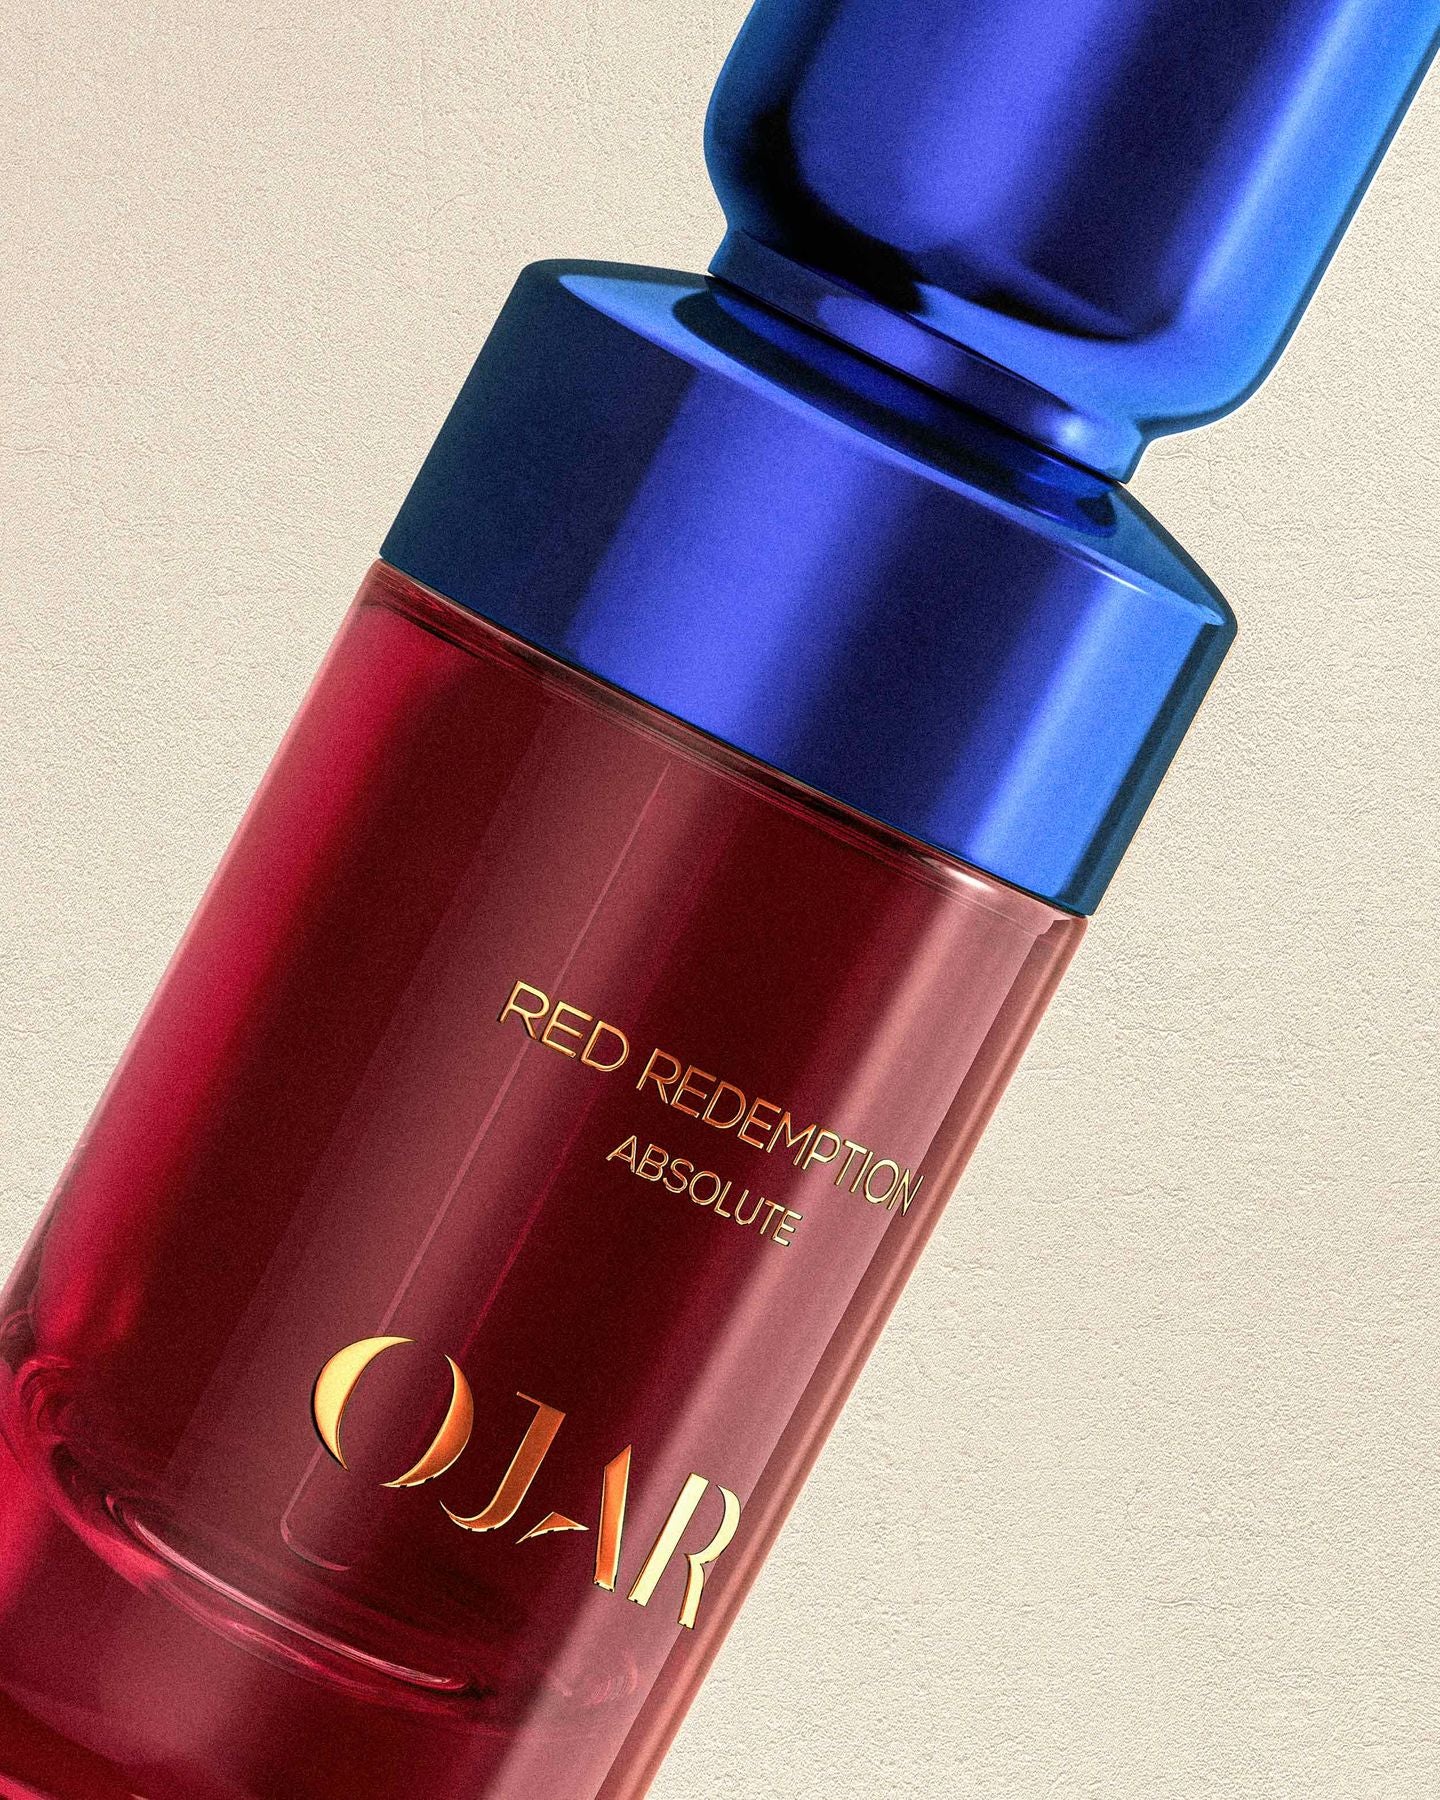 OJAR RED REDEMPTION PERFUME OIL ABSOLUTE 20 ML RED REDEMPTION PERFUME OIL ABSOLUTE 20 ML 2000001833131 €165,00